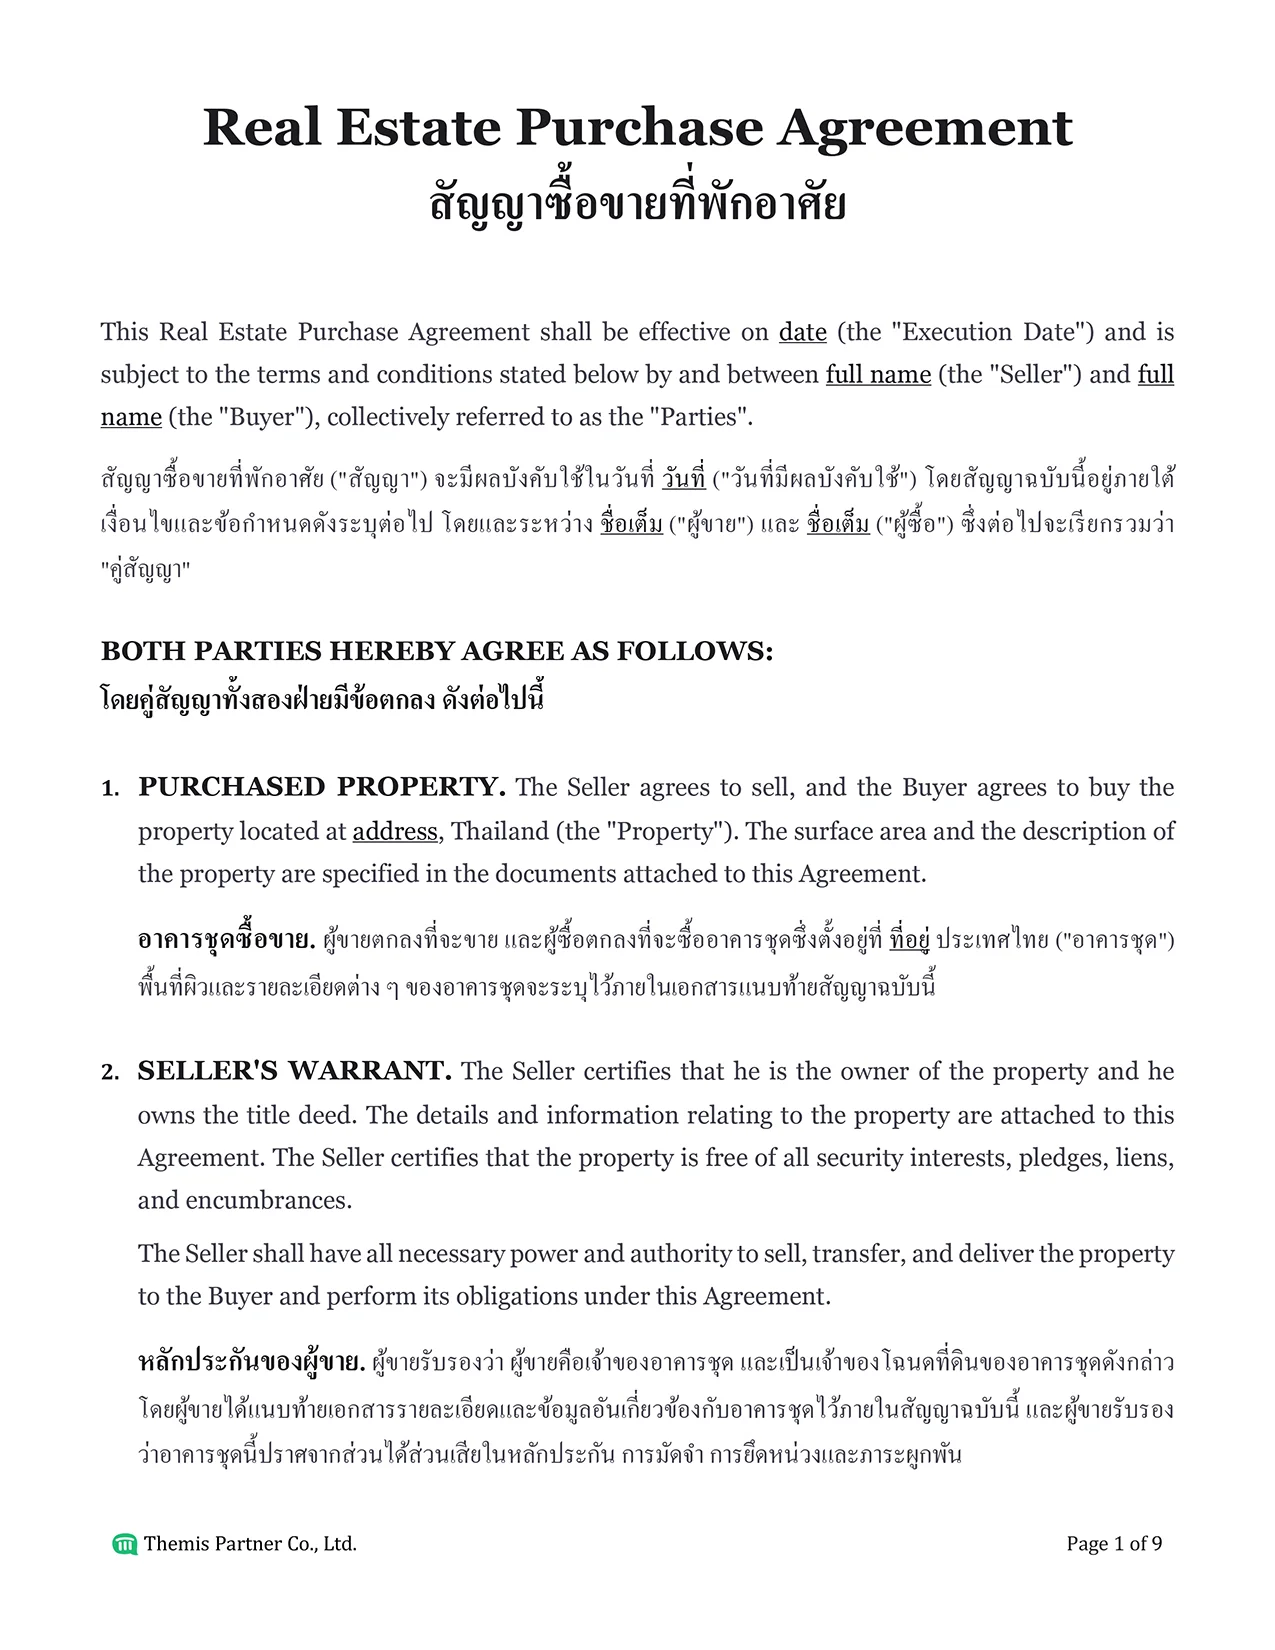 Real estate purchase agreement Thailand 1